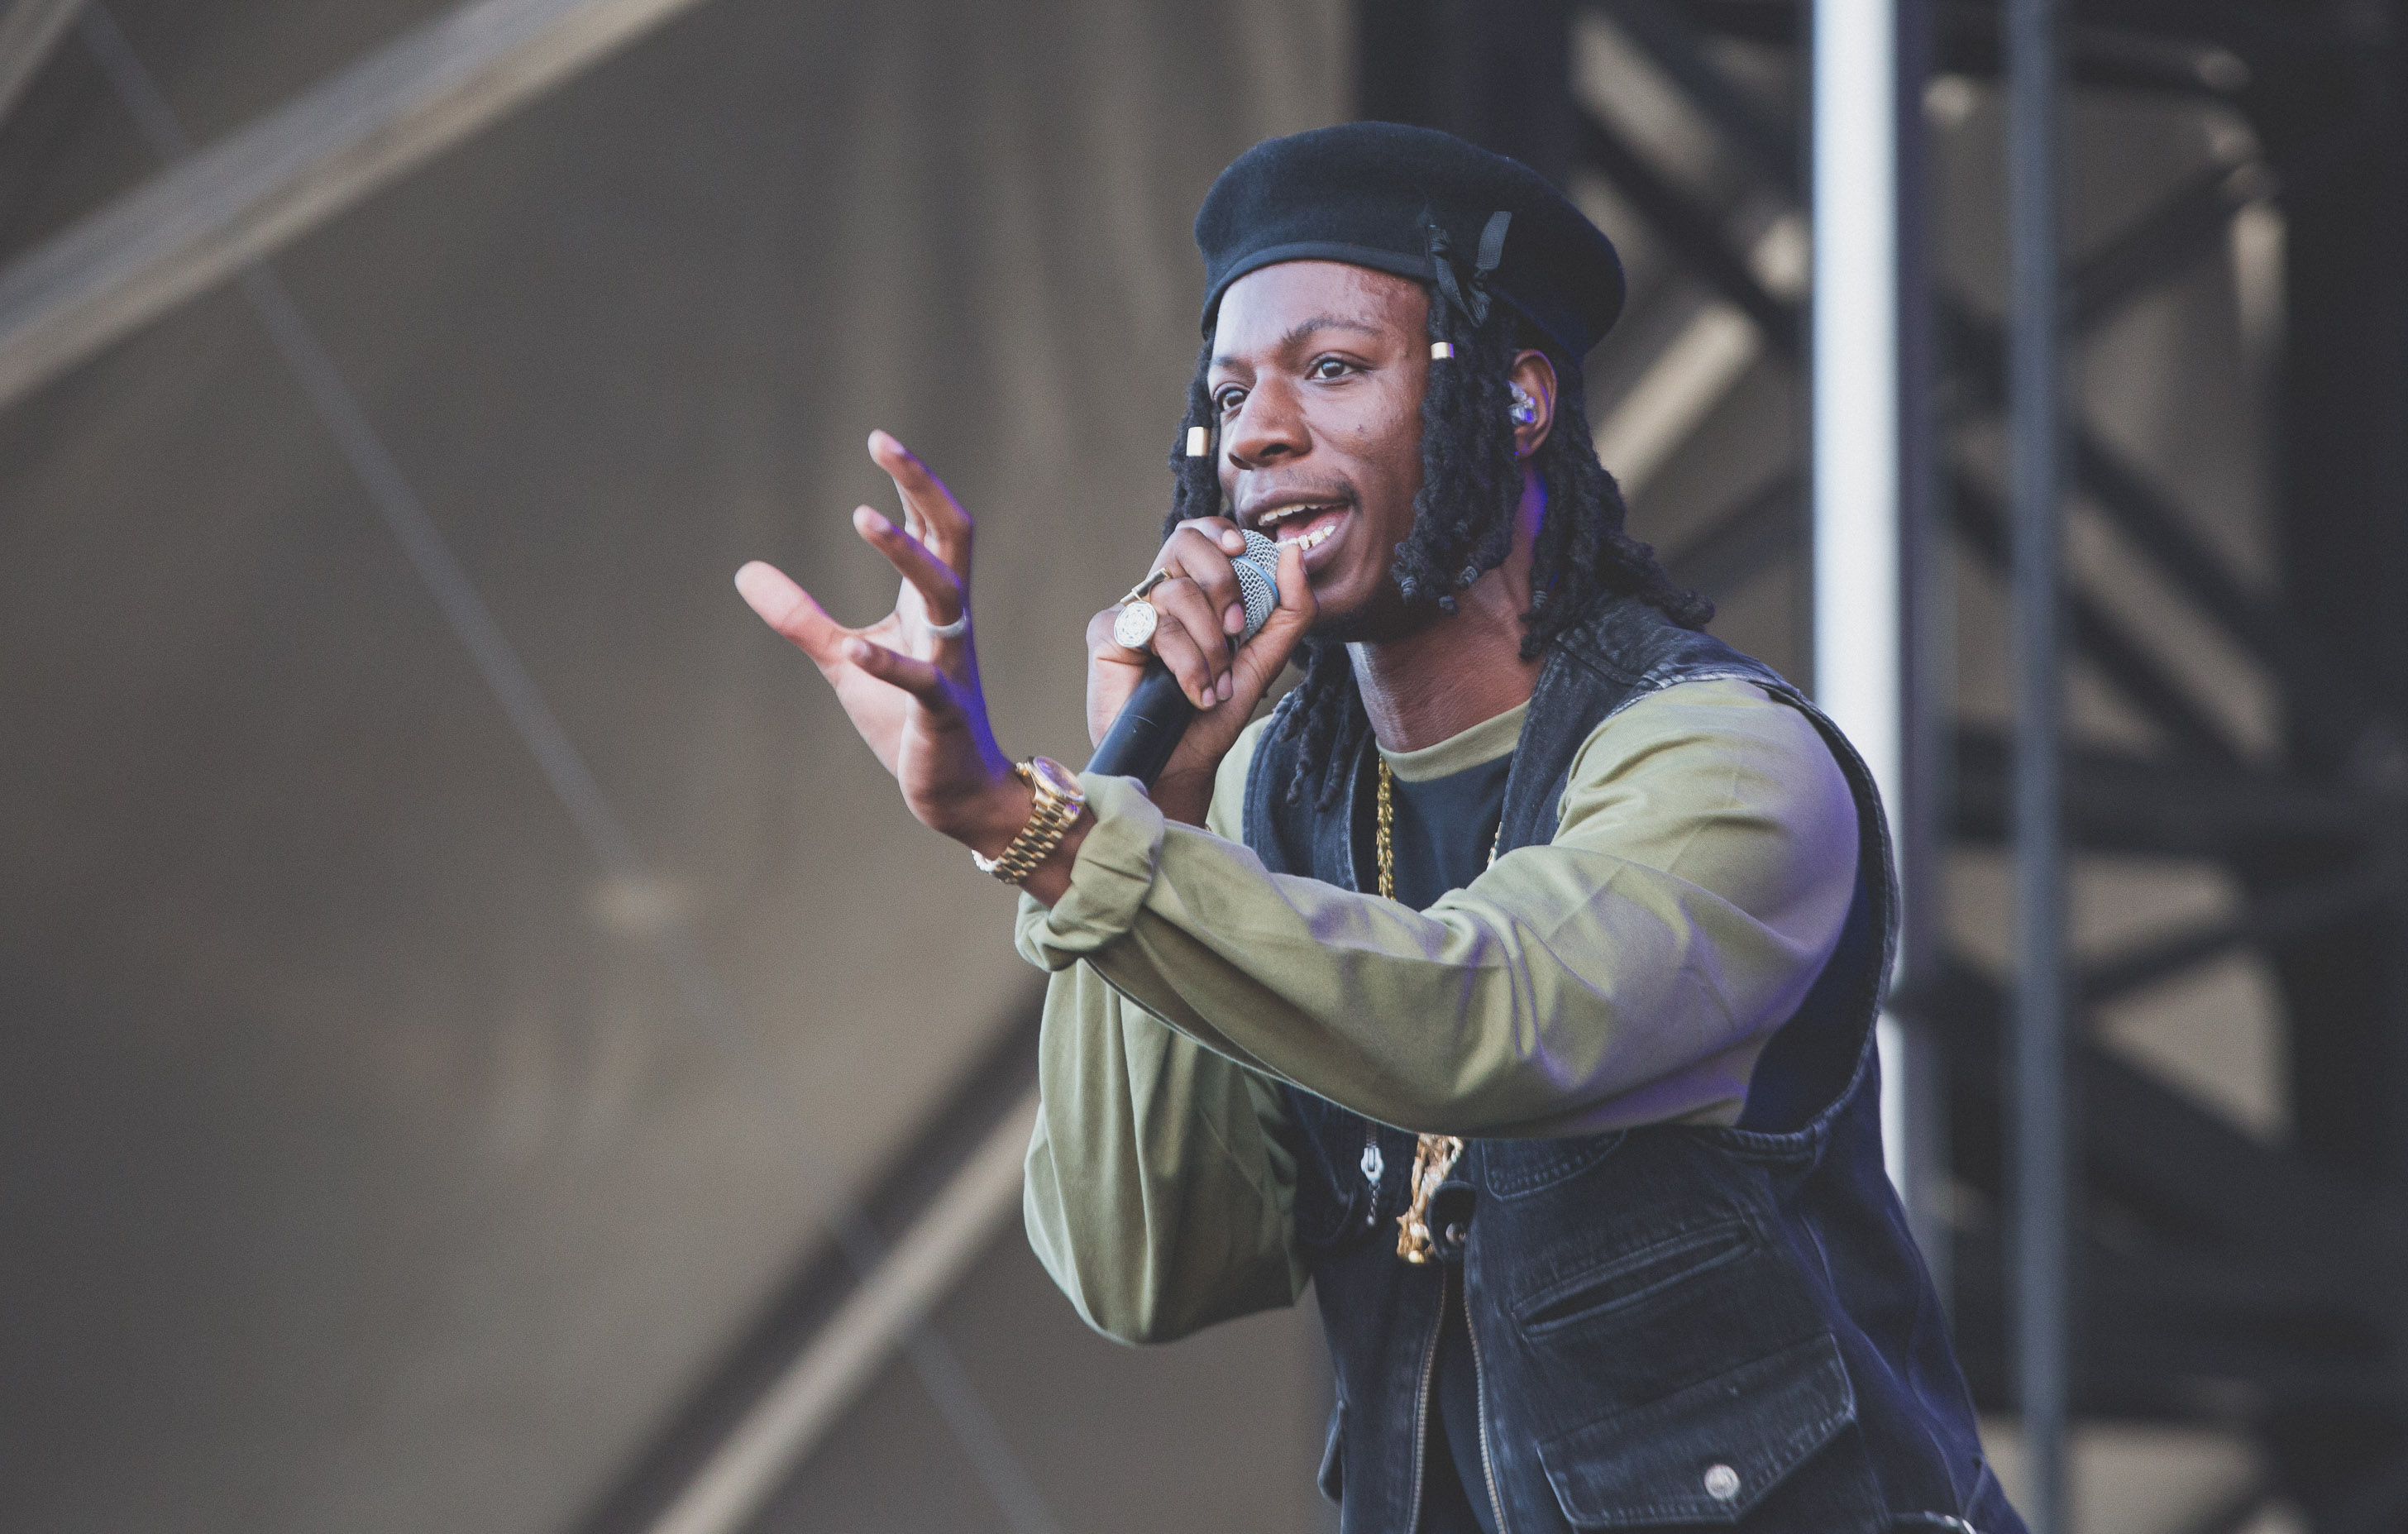 Joey Bada$$ Is Working With Non-Profit To Help Homeless NYC Students